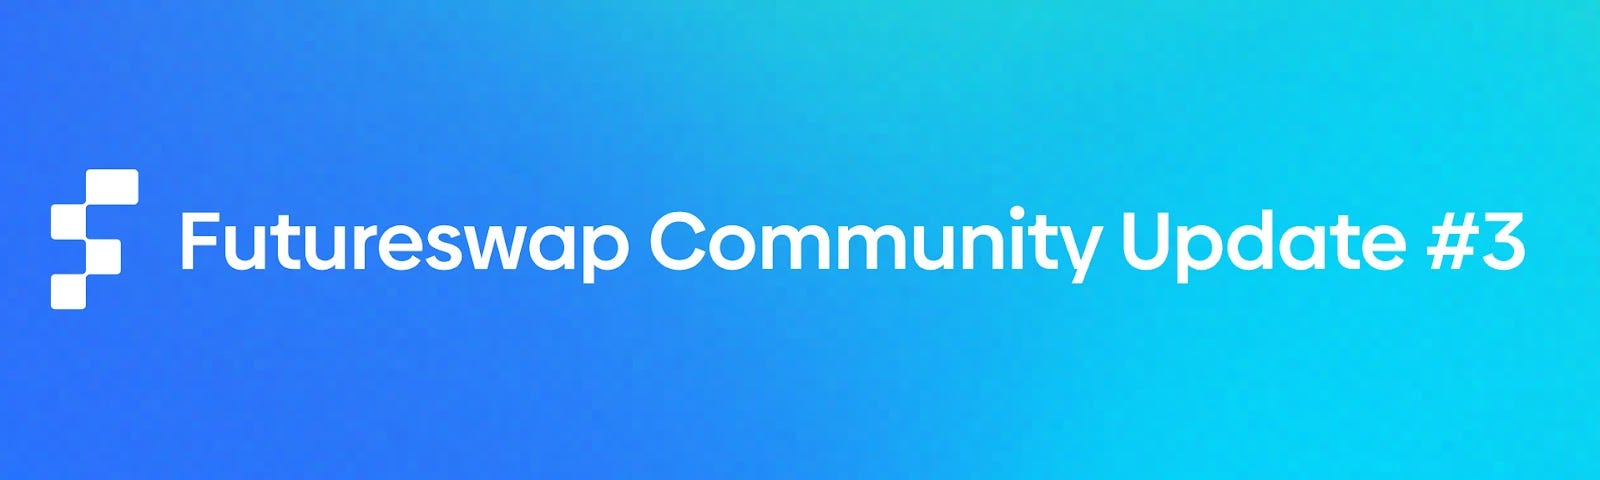 A blue gradient background with the FS logo and the text: Futureswap Community Update #3 on top of it